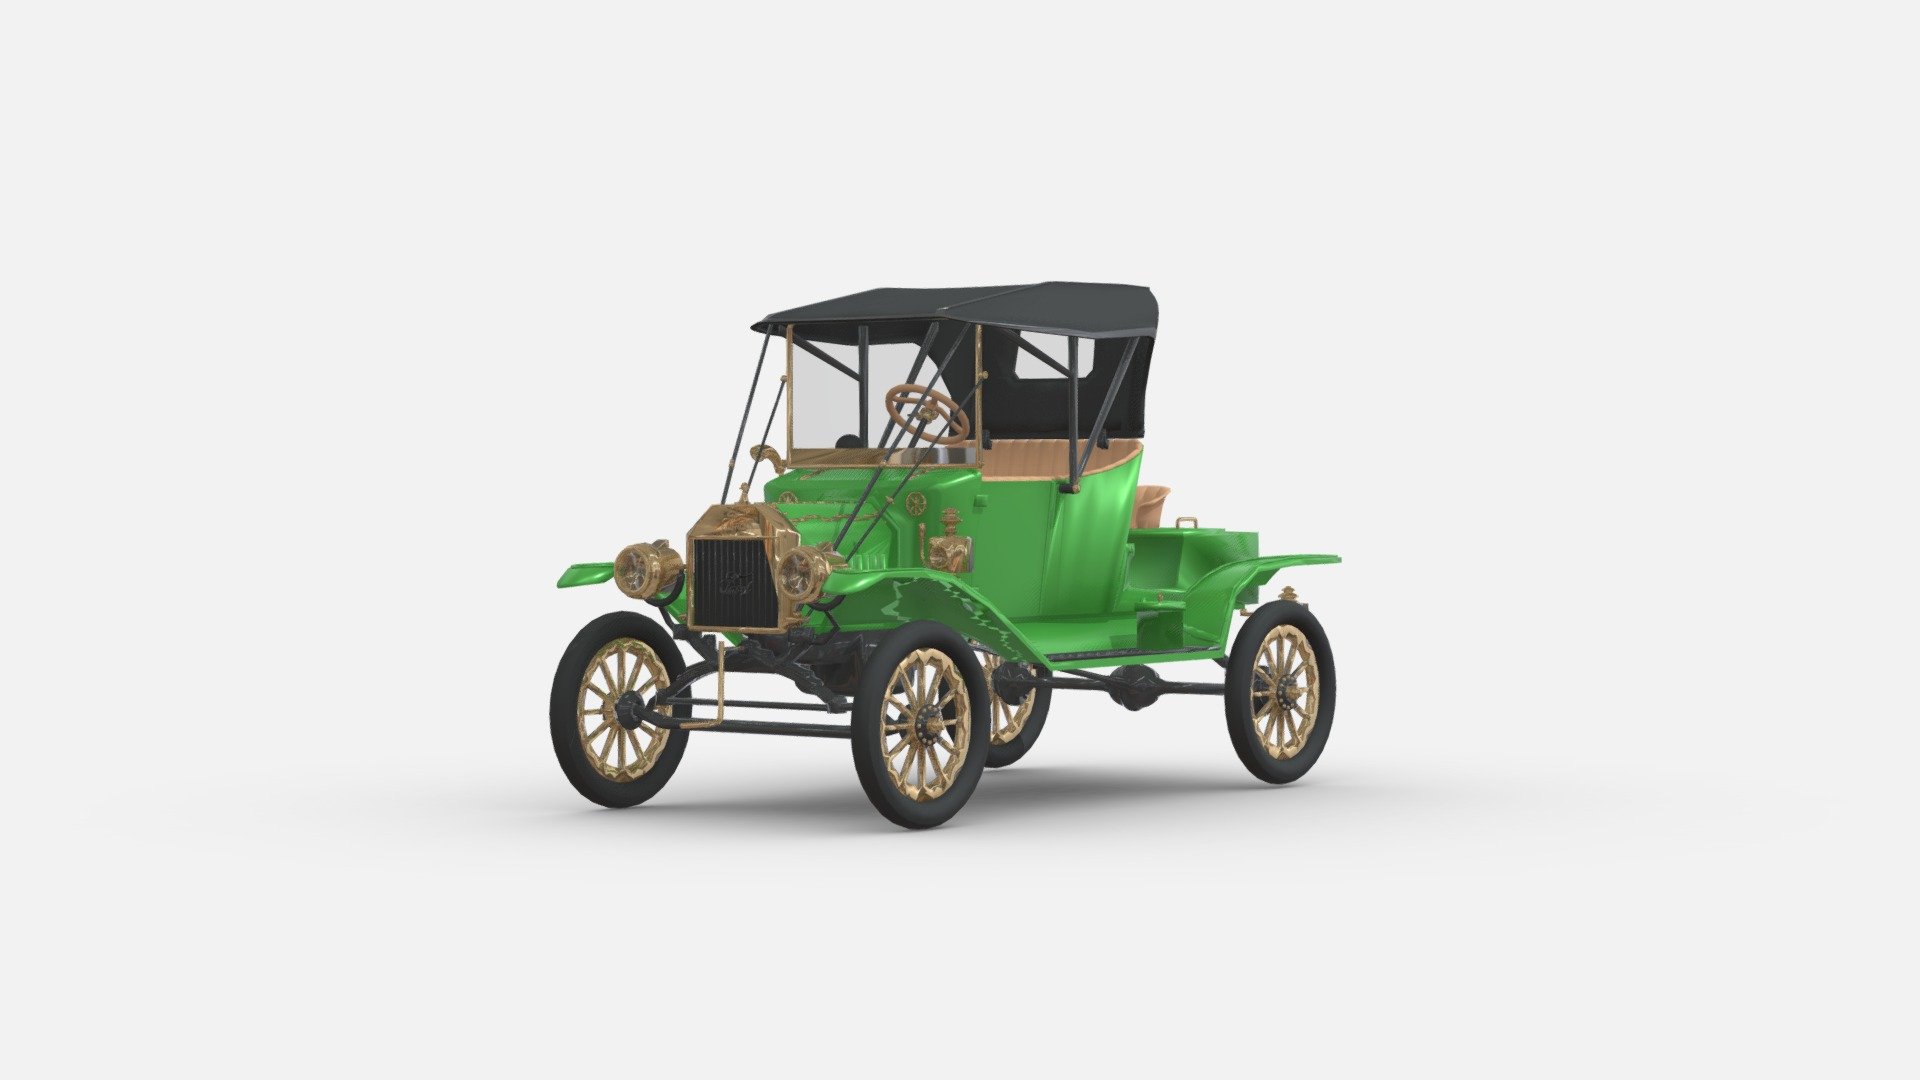 Could you please consider liking and subscribing to my account. Your support would mean a lot to me. Thank you! - 3d model Ford Model T - Buy Royalty Free 3D model by zizian 3d model